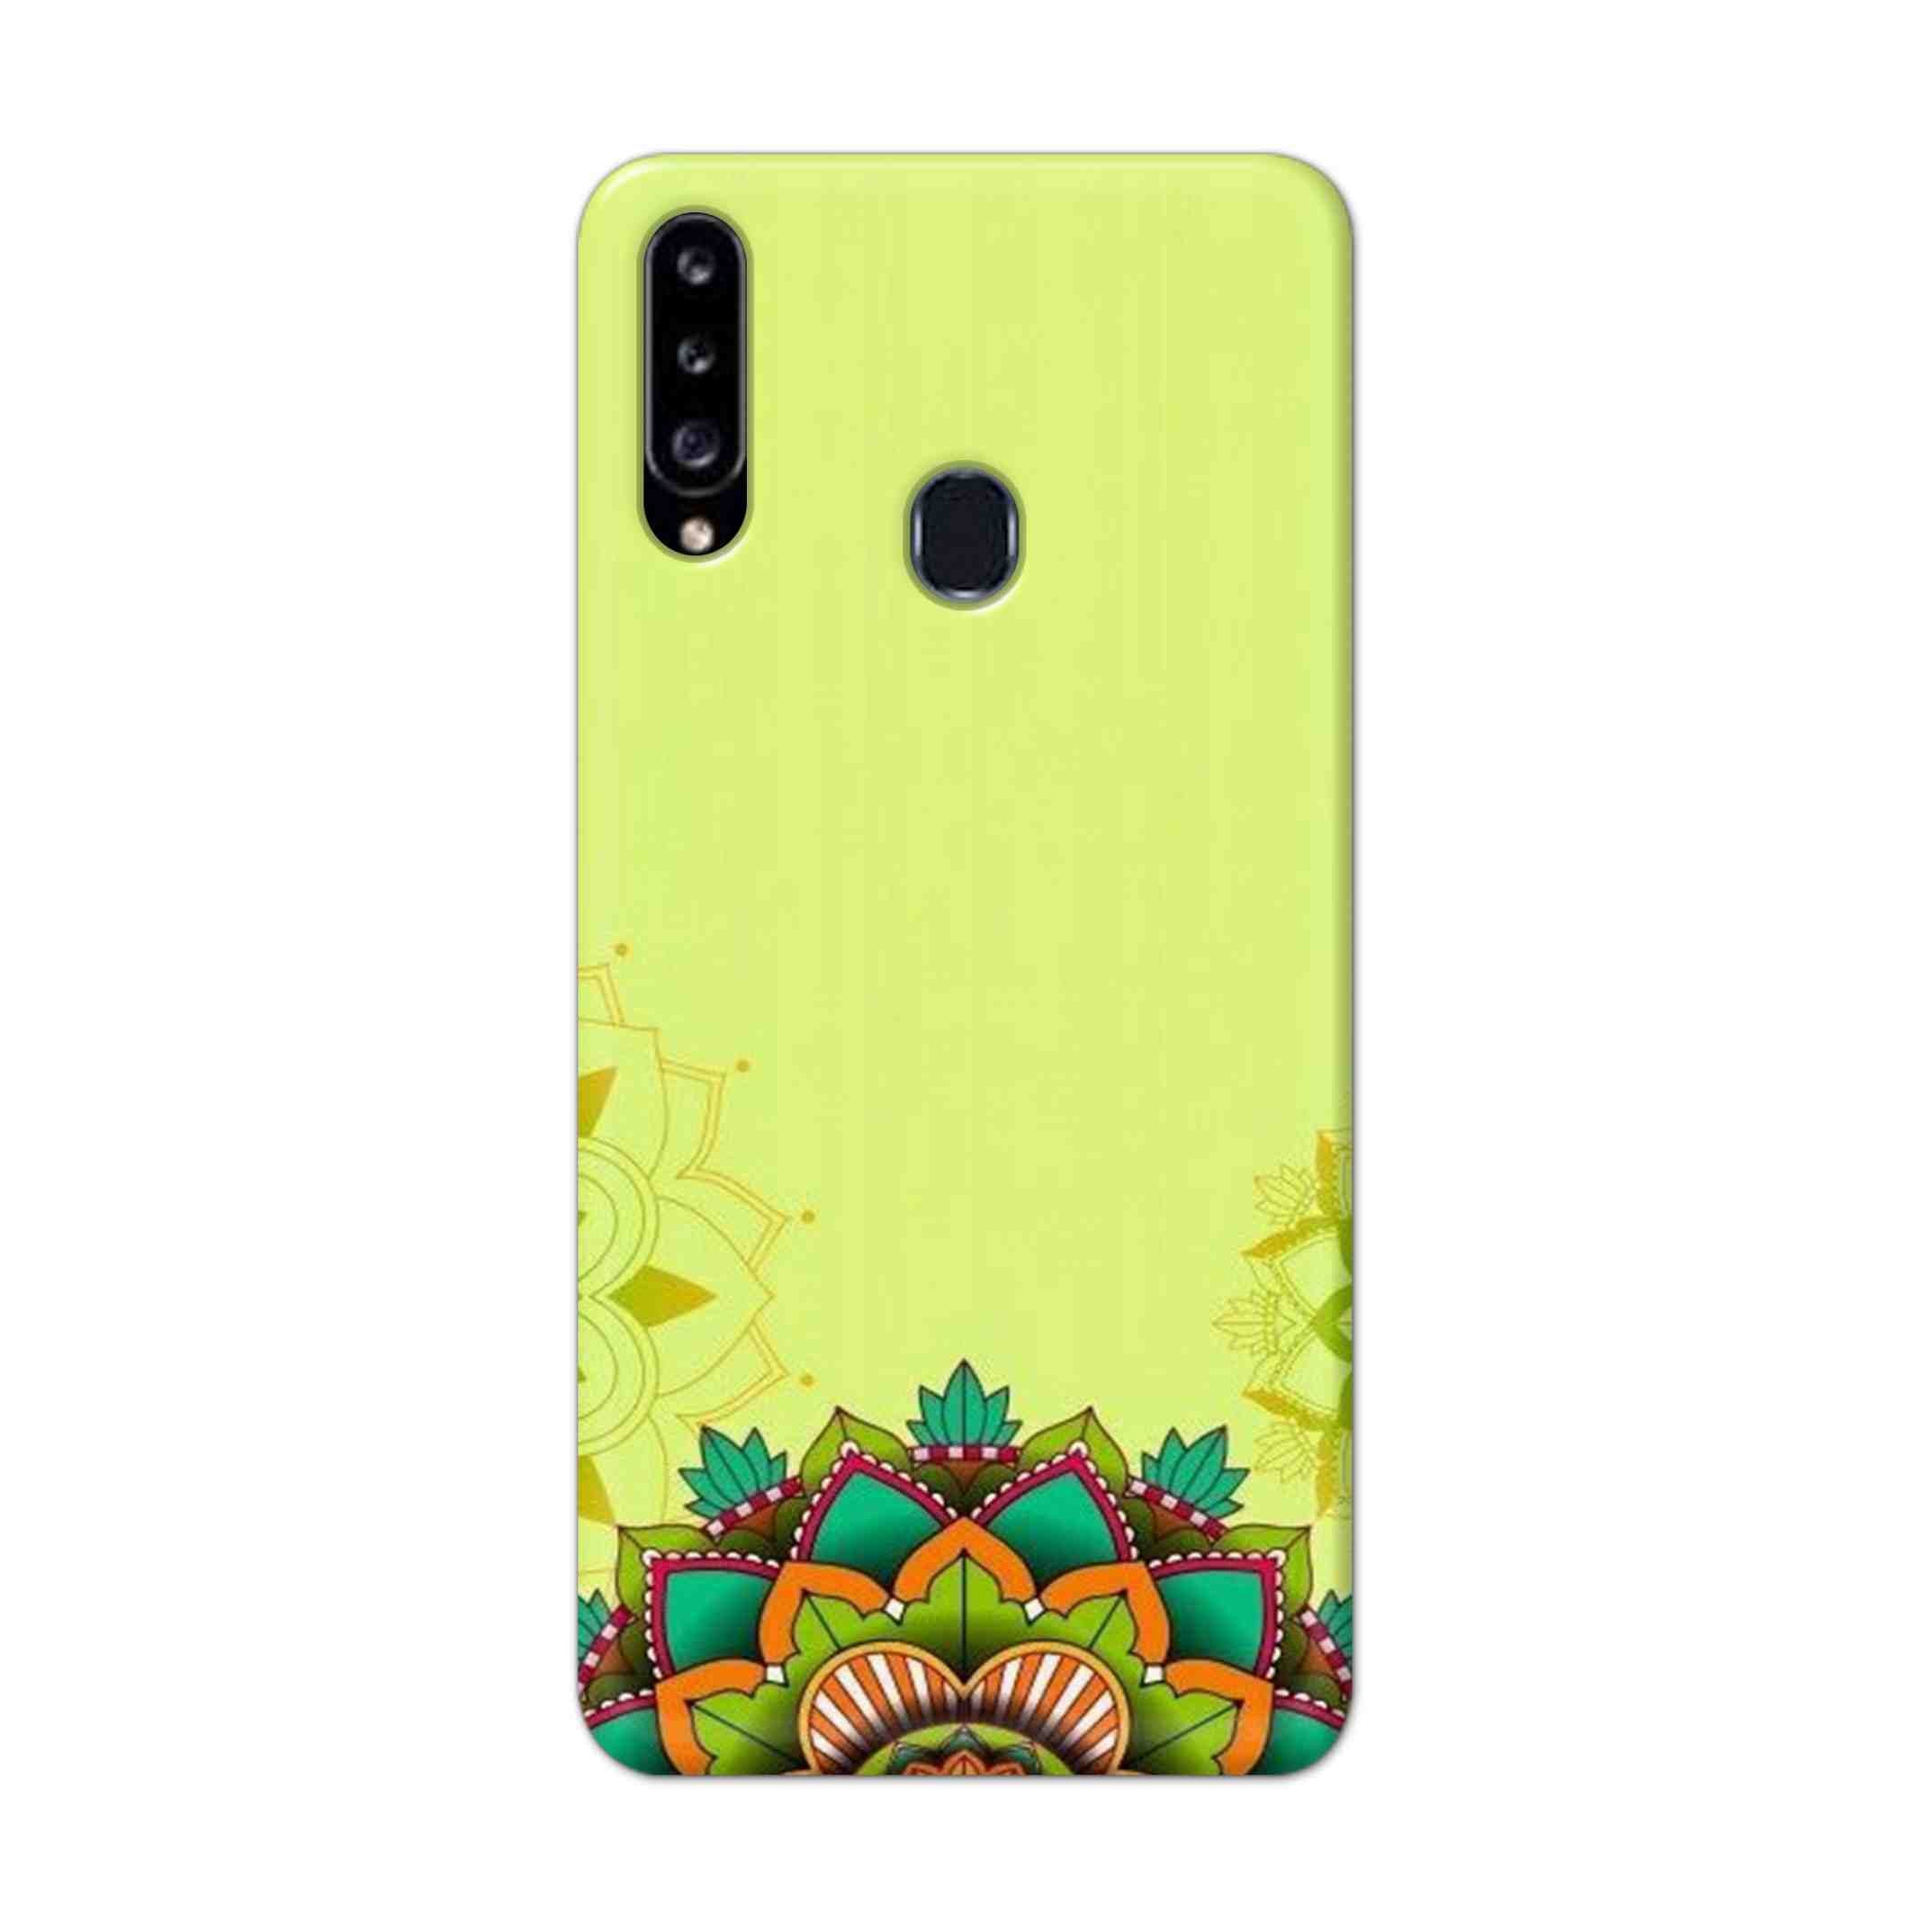 Buy Flower Mandala Hard Back Mobile Phone Case Cover For Samsung Galaxy A21 Online